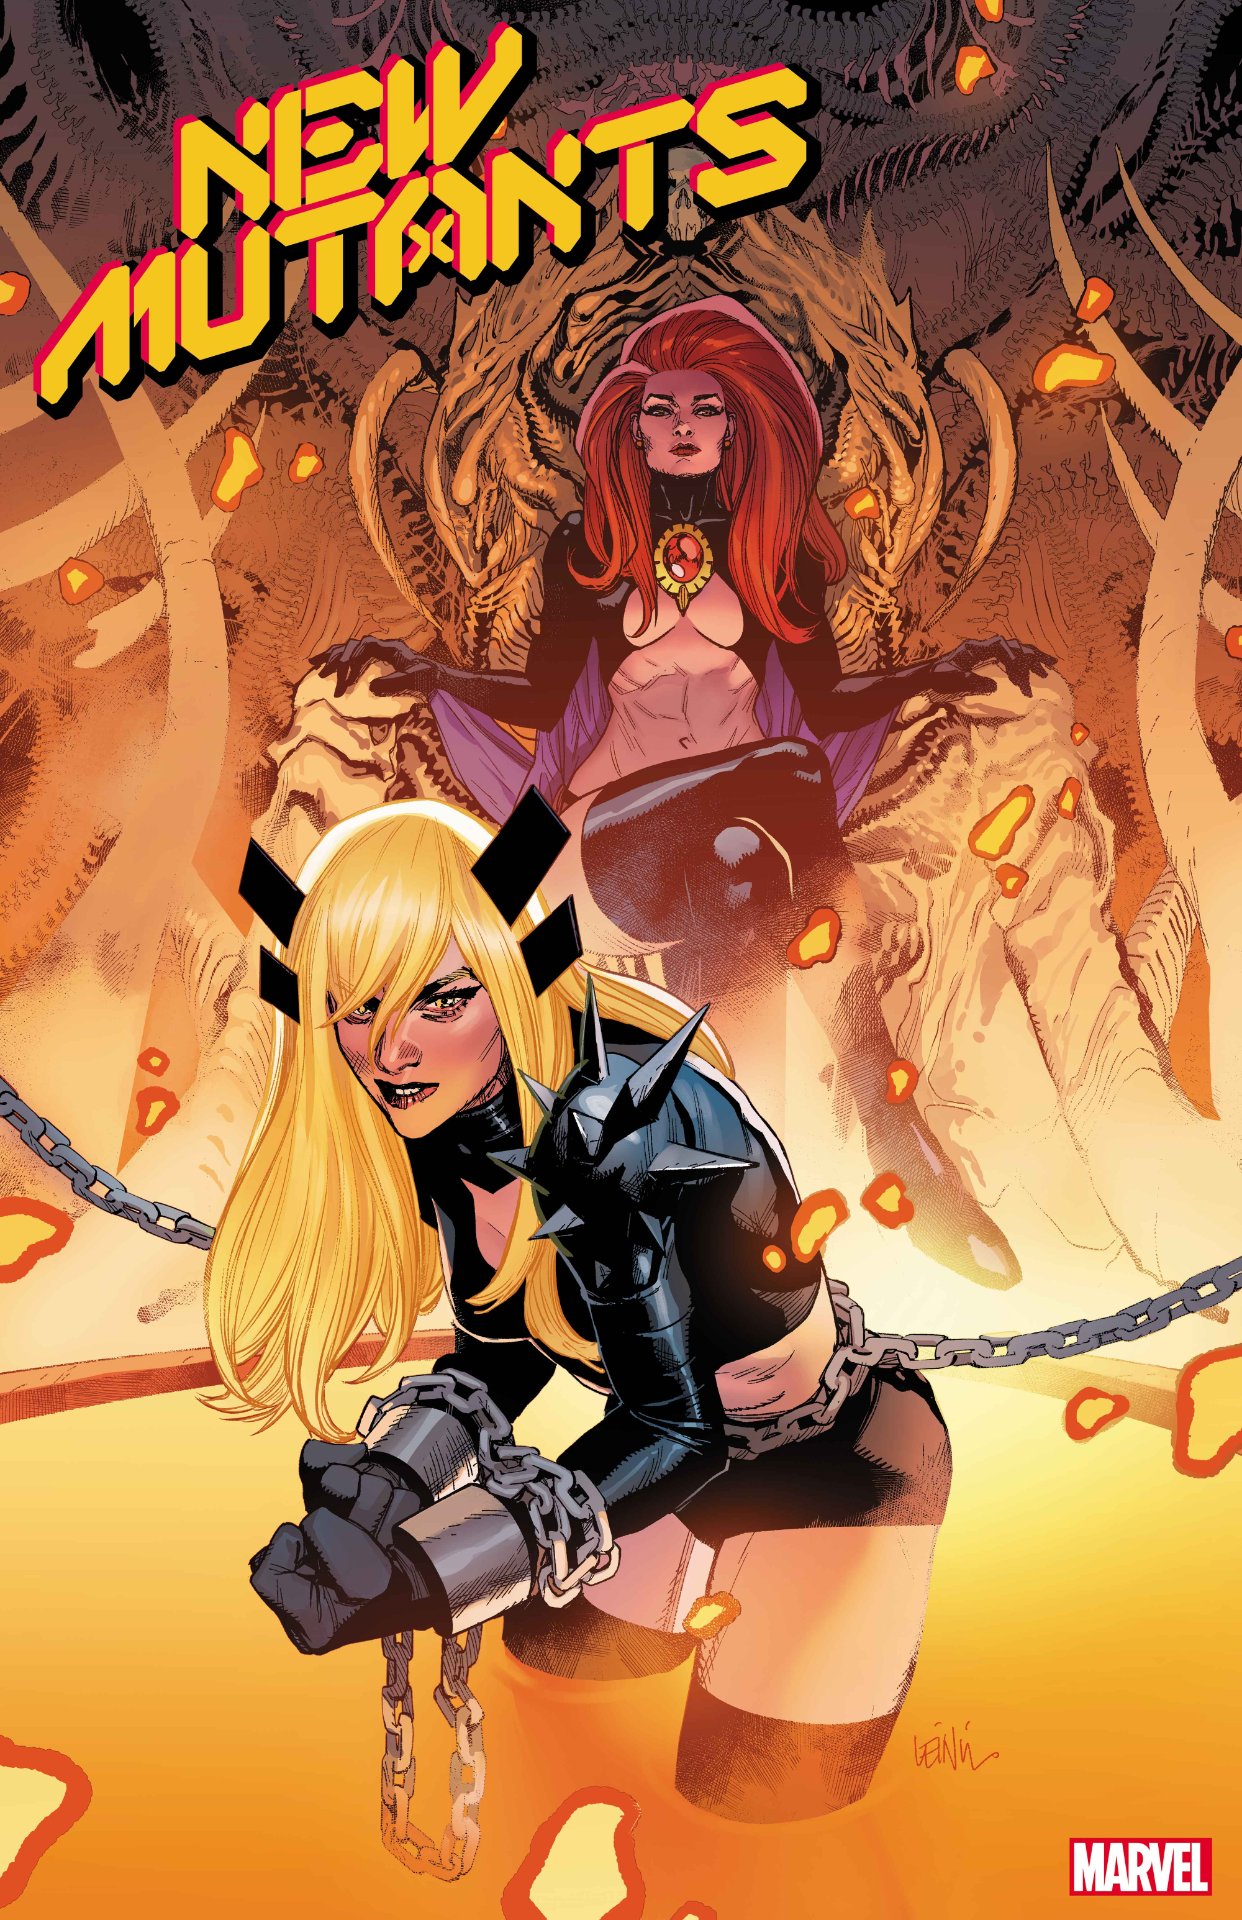 Two Queens Battle For The Throne Of Limbo In New Mutants #25